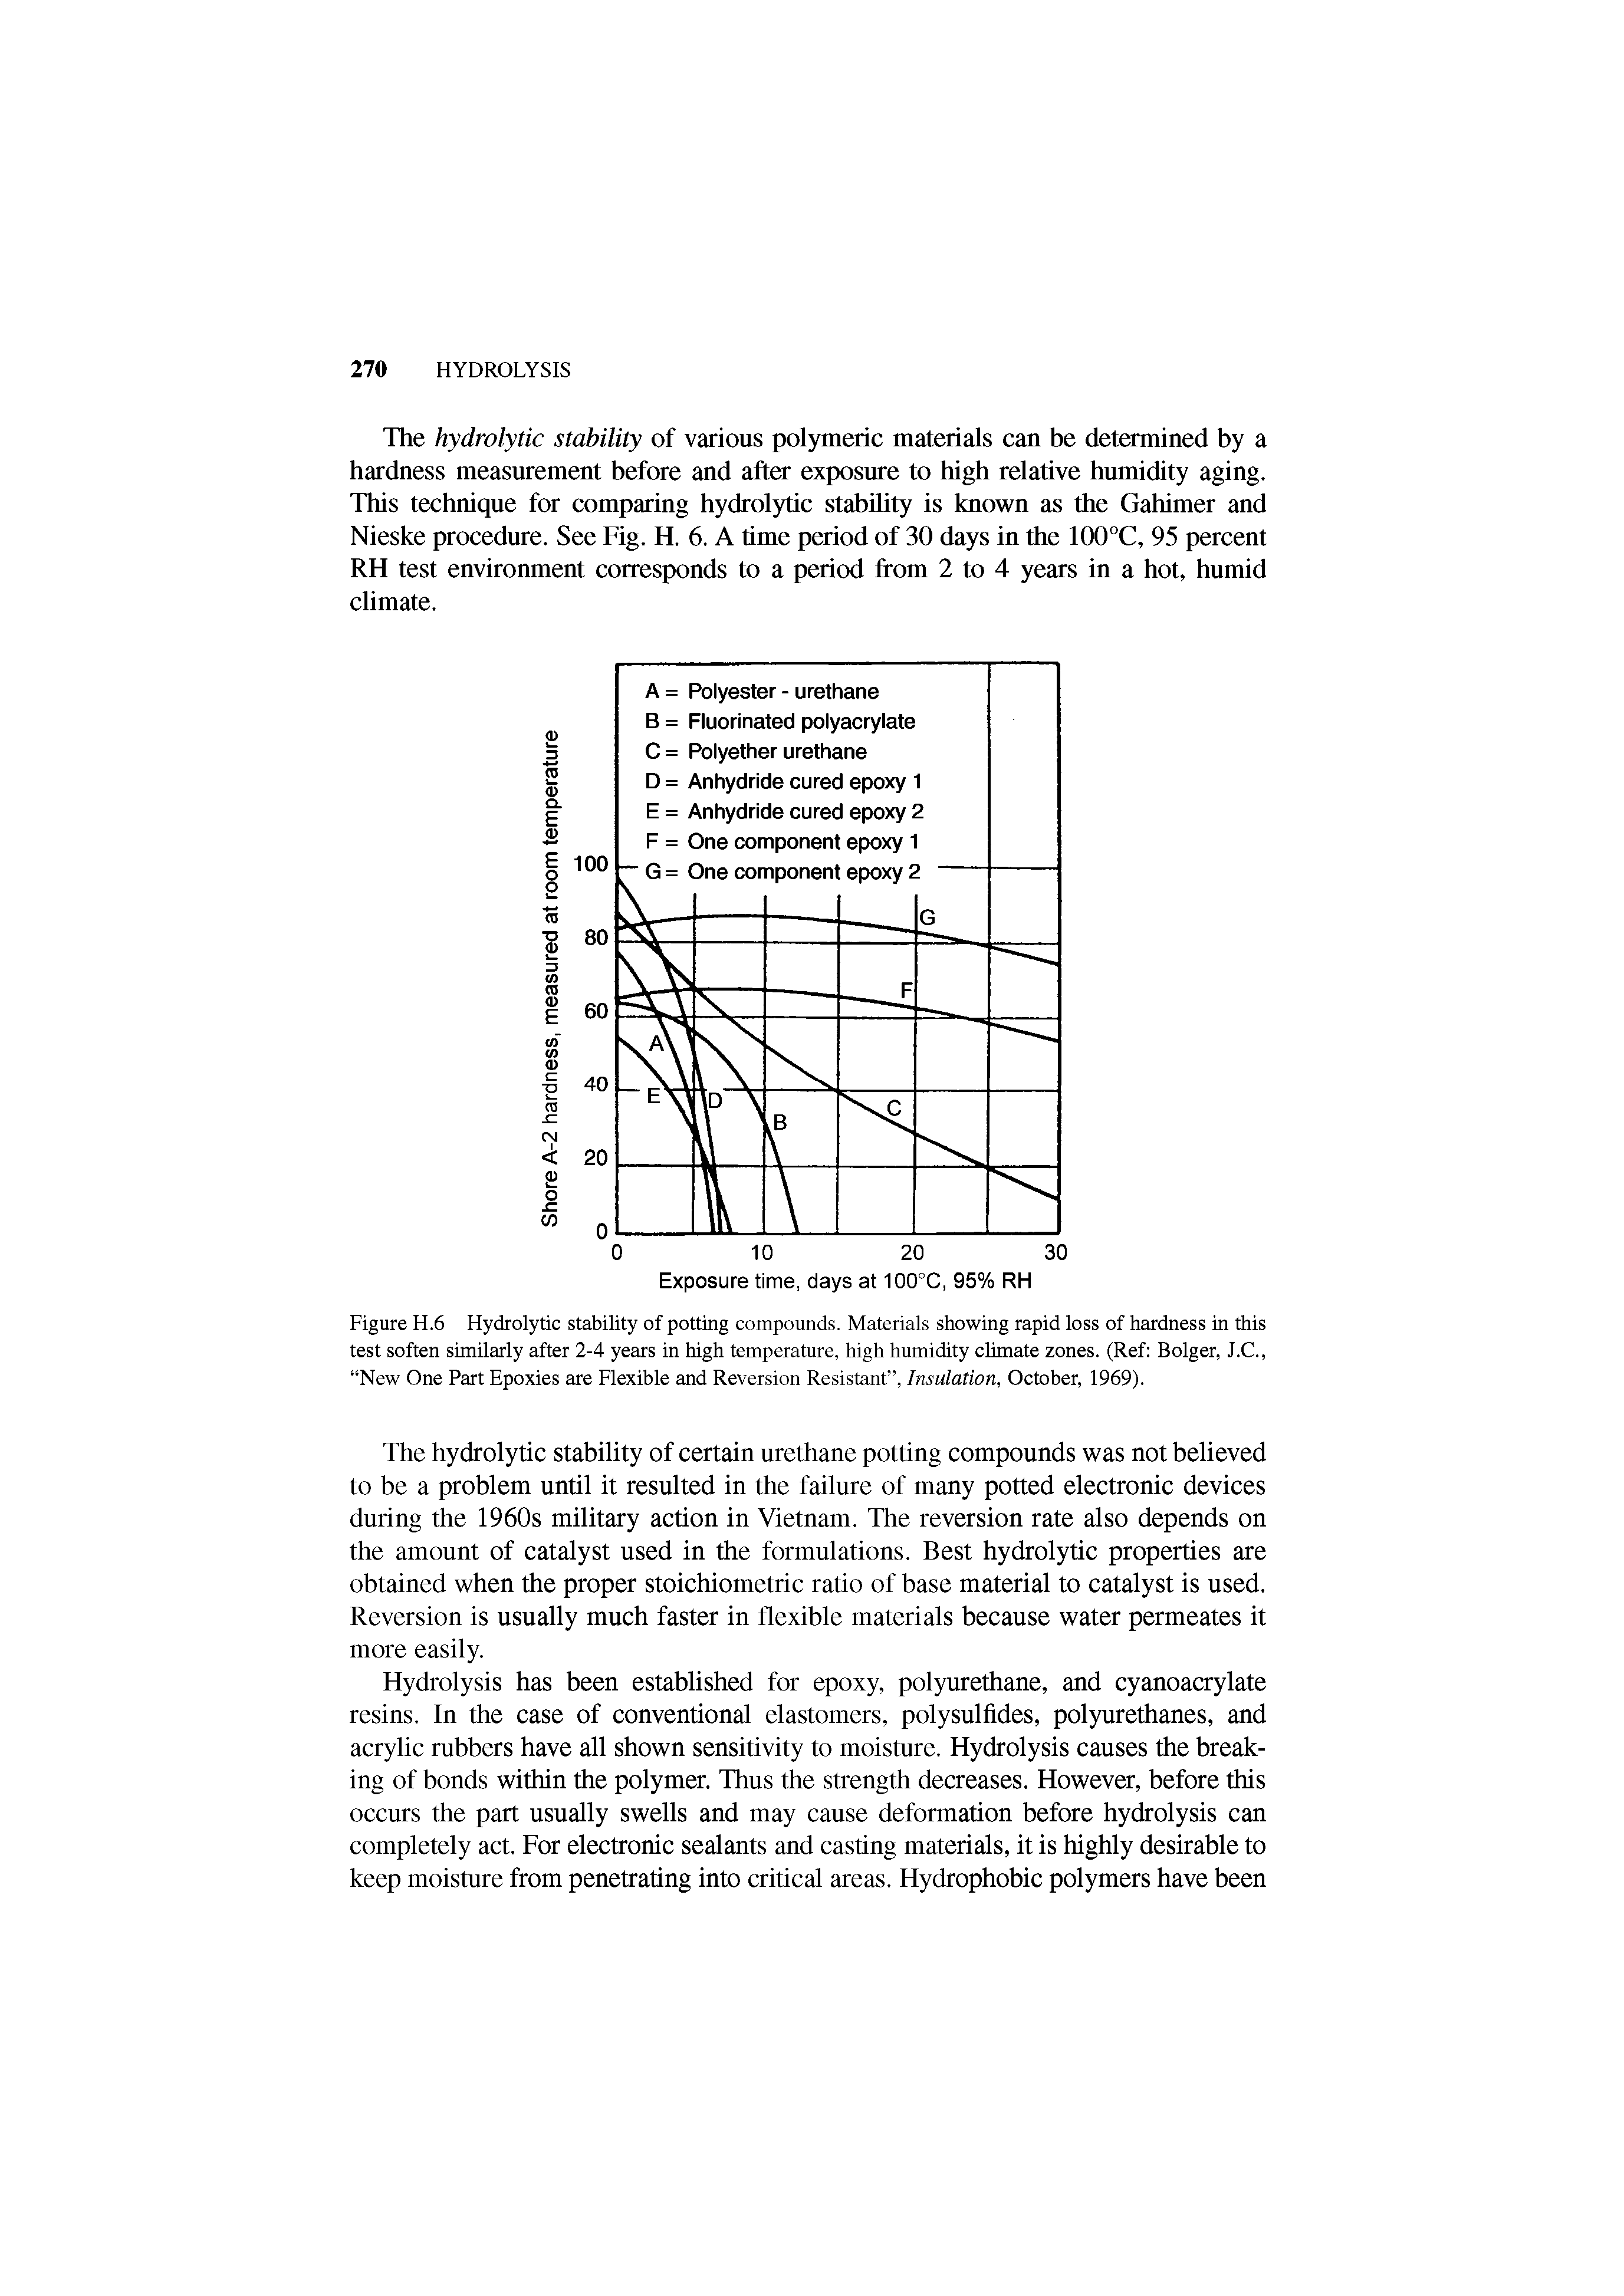 Figure H.6 Hydrolytic stability of potting compounds. Materials showing rapid loss of hardness in this test soften similarly after 2-4 years in high temperature, high humidity climate zones. (Ref Bolger, J.C., New One Part Epoxies are Rexible and Reversion Resistant , Insulation, October, 1969).